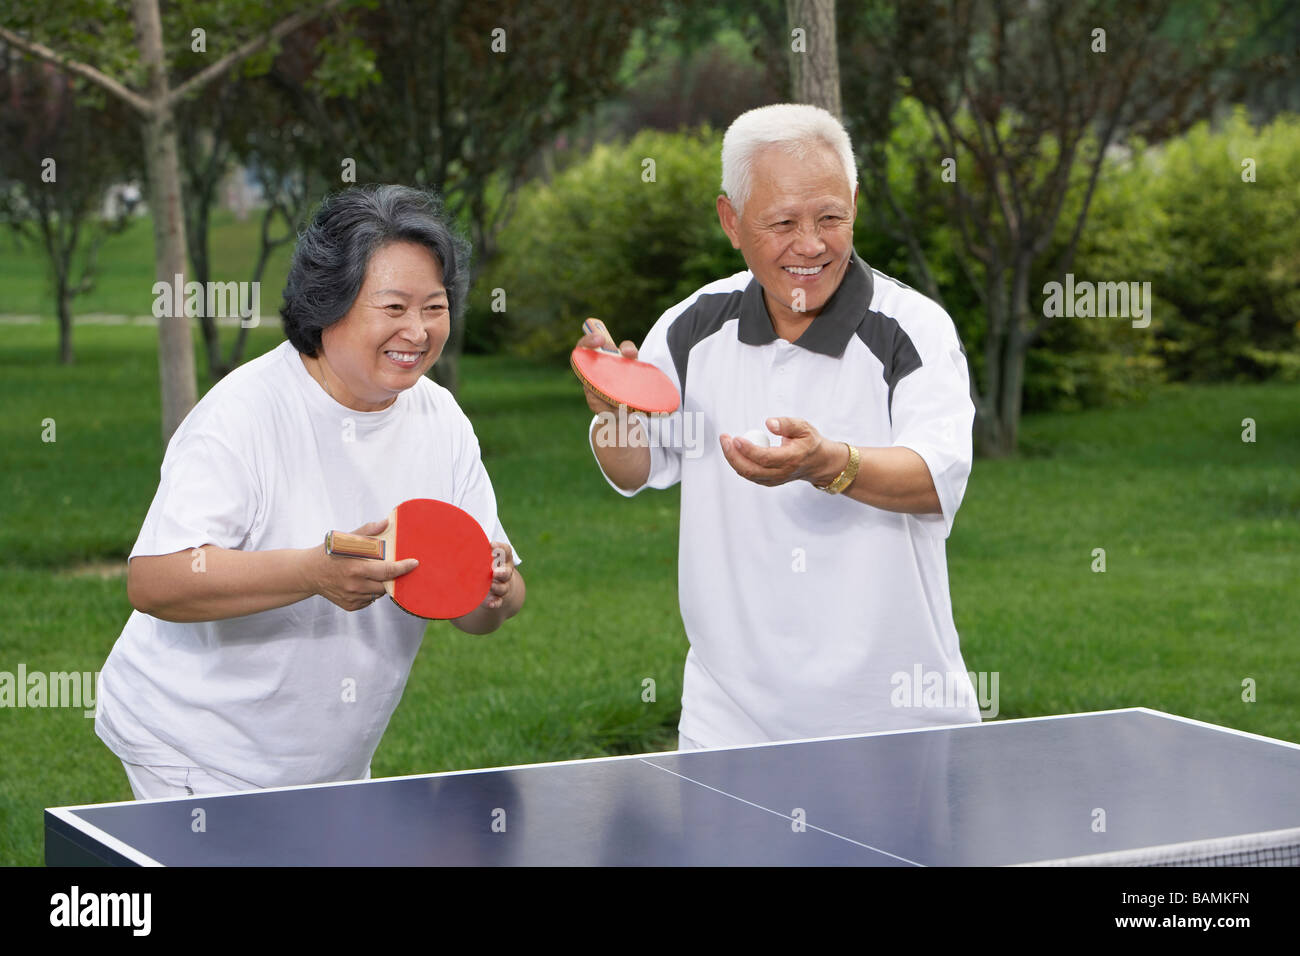 Elderly Couple Playing Ping Pong Stock Photo